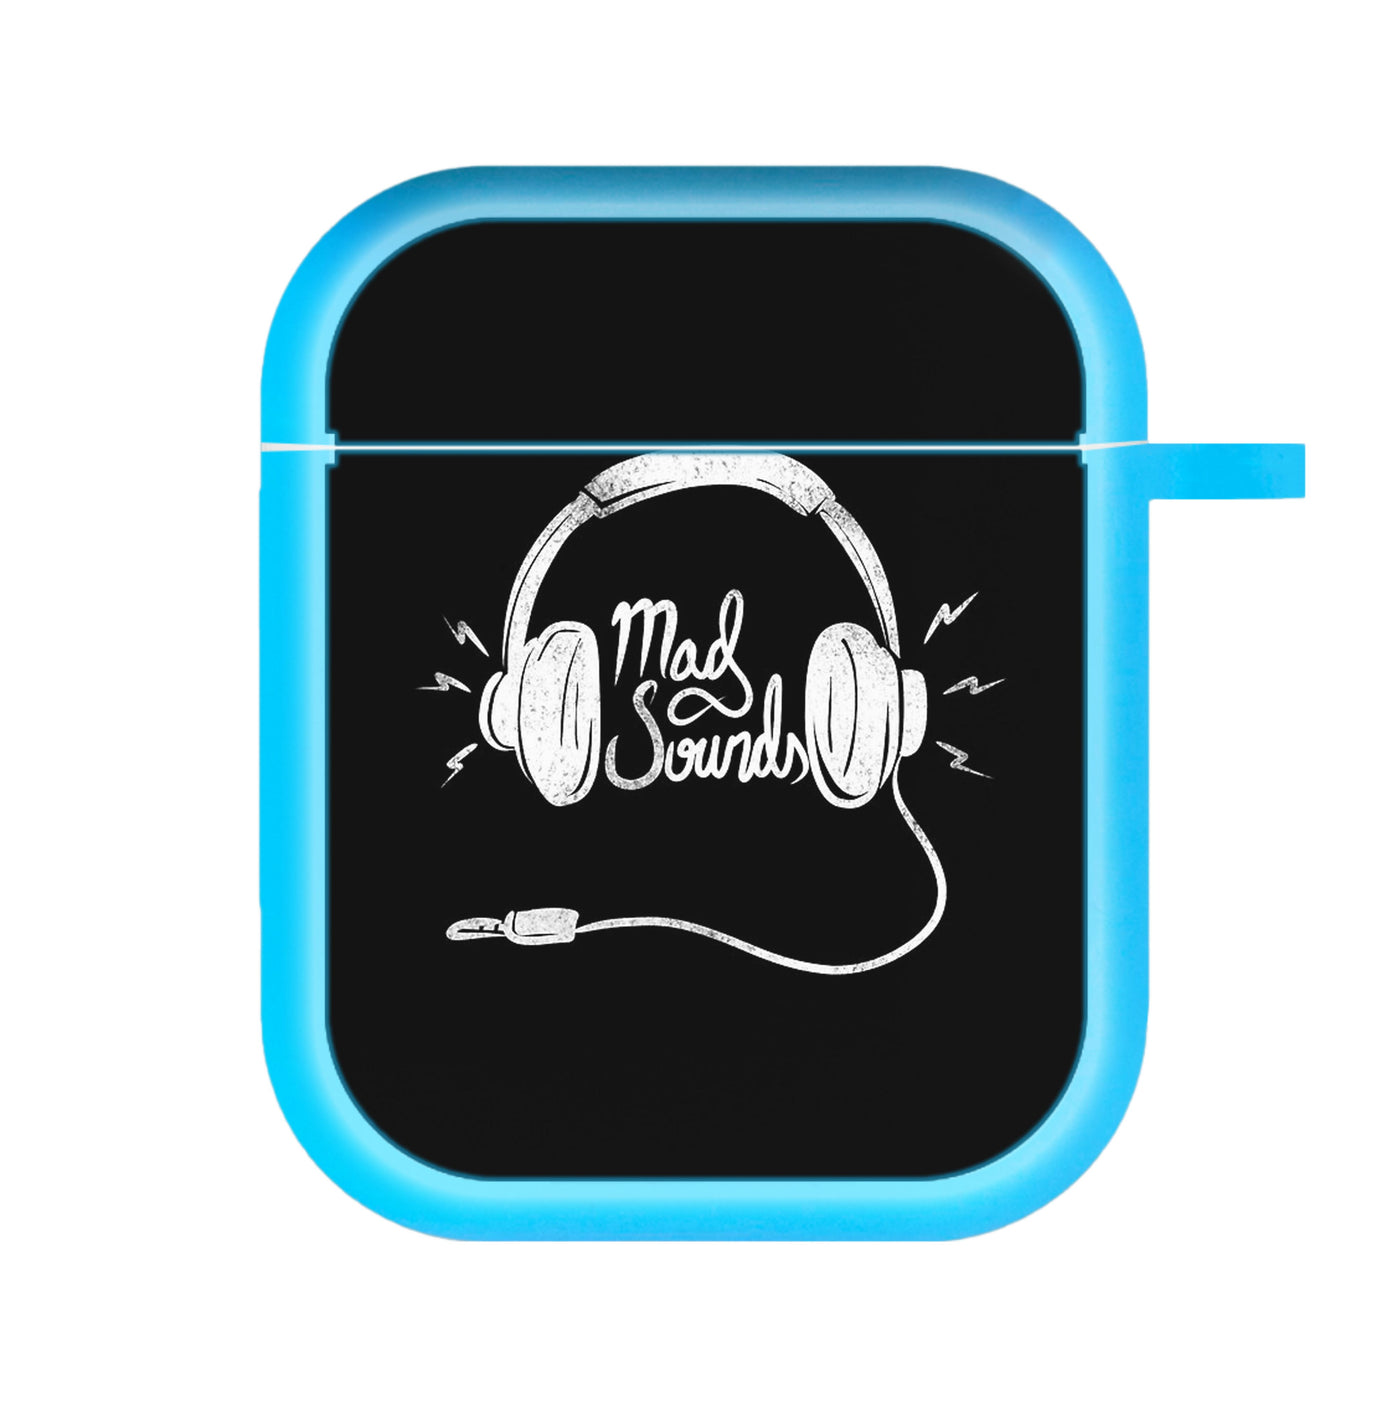 Mad Sounds - Arctic Monkeys AirPods Case